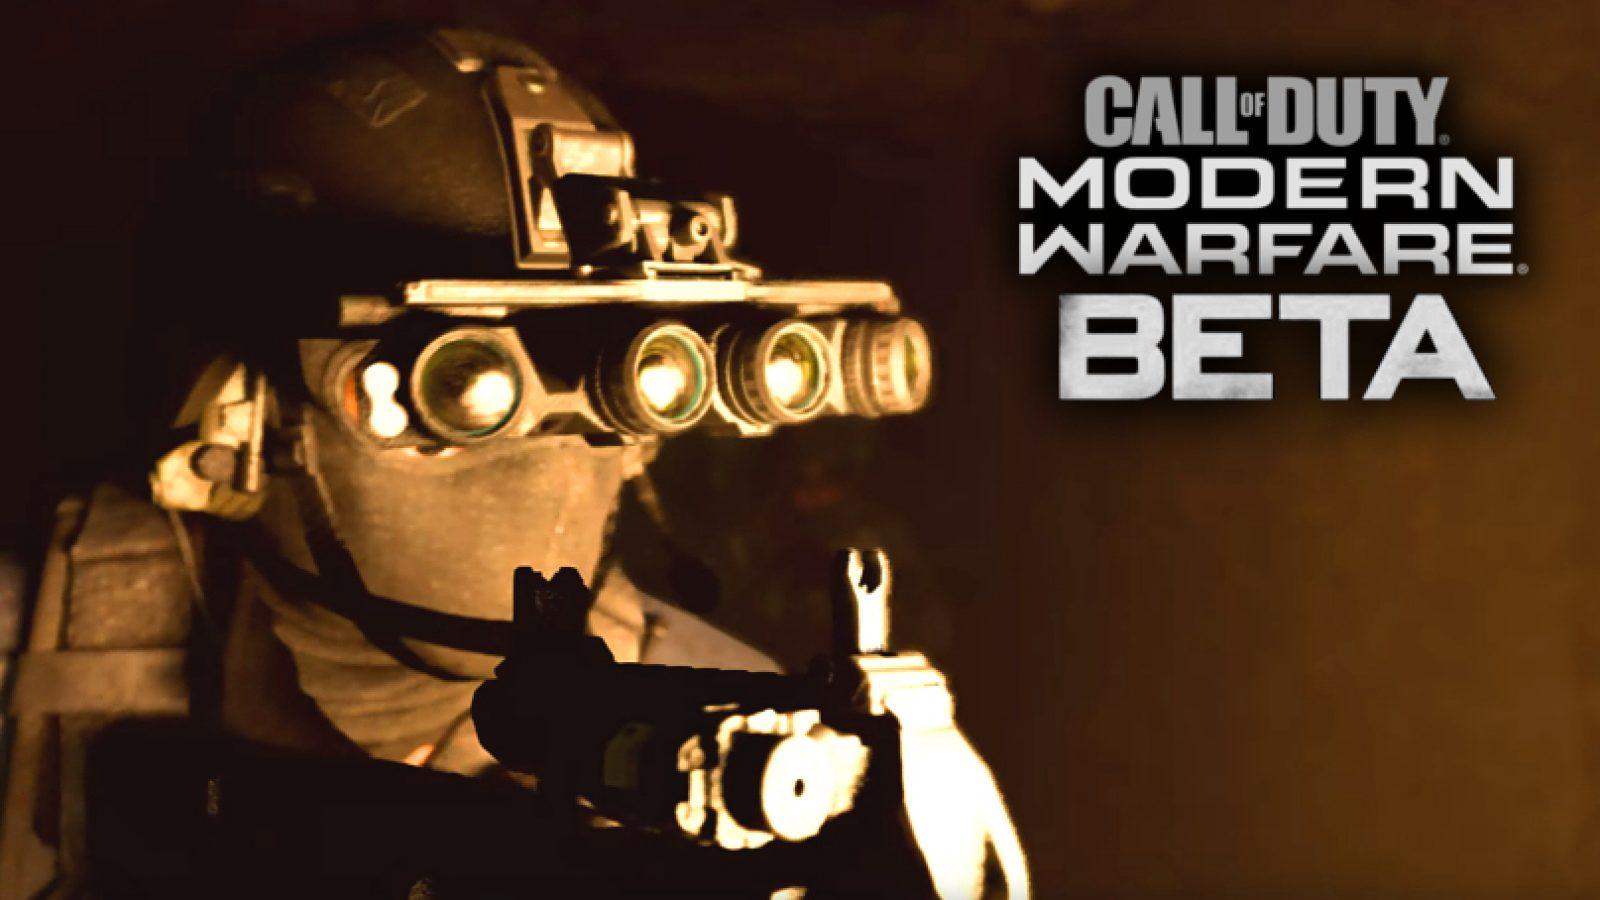 Call of Duty: Modern Warfare 3's Multiplayer Beta Dates Have Been Revealed